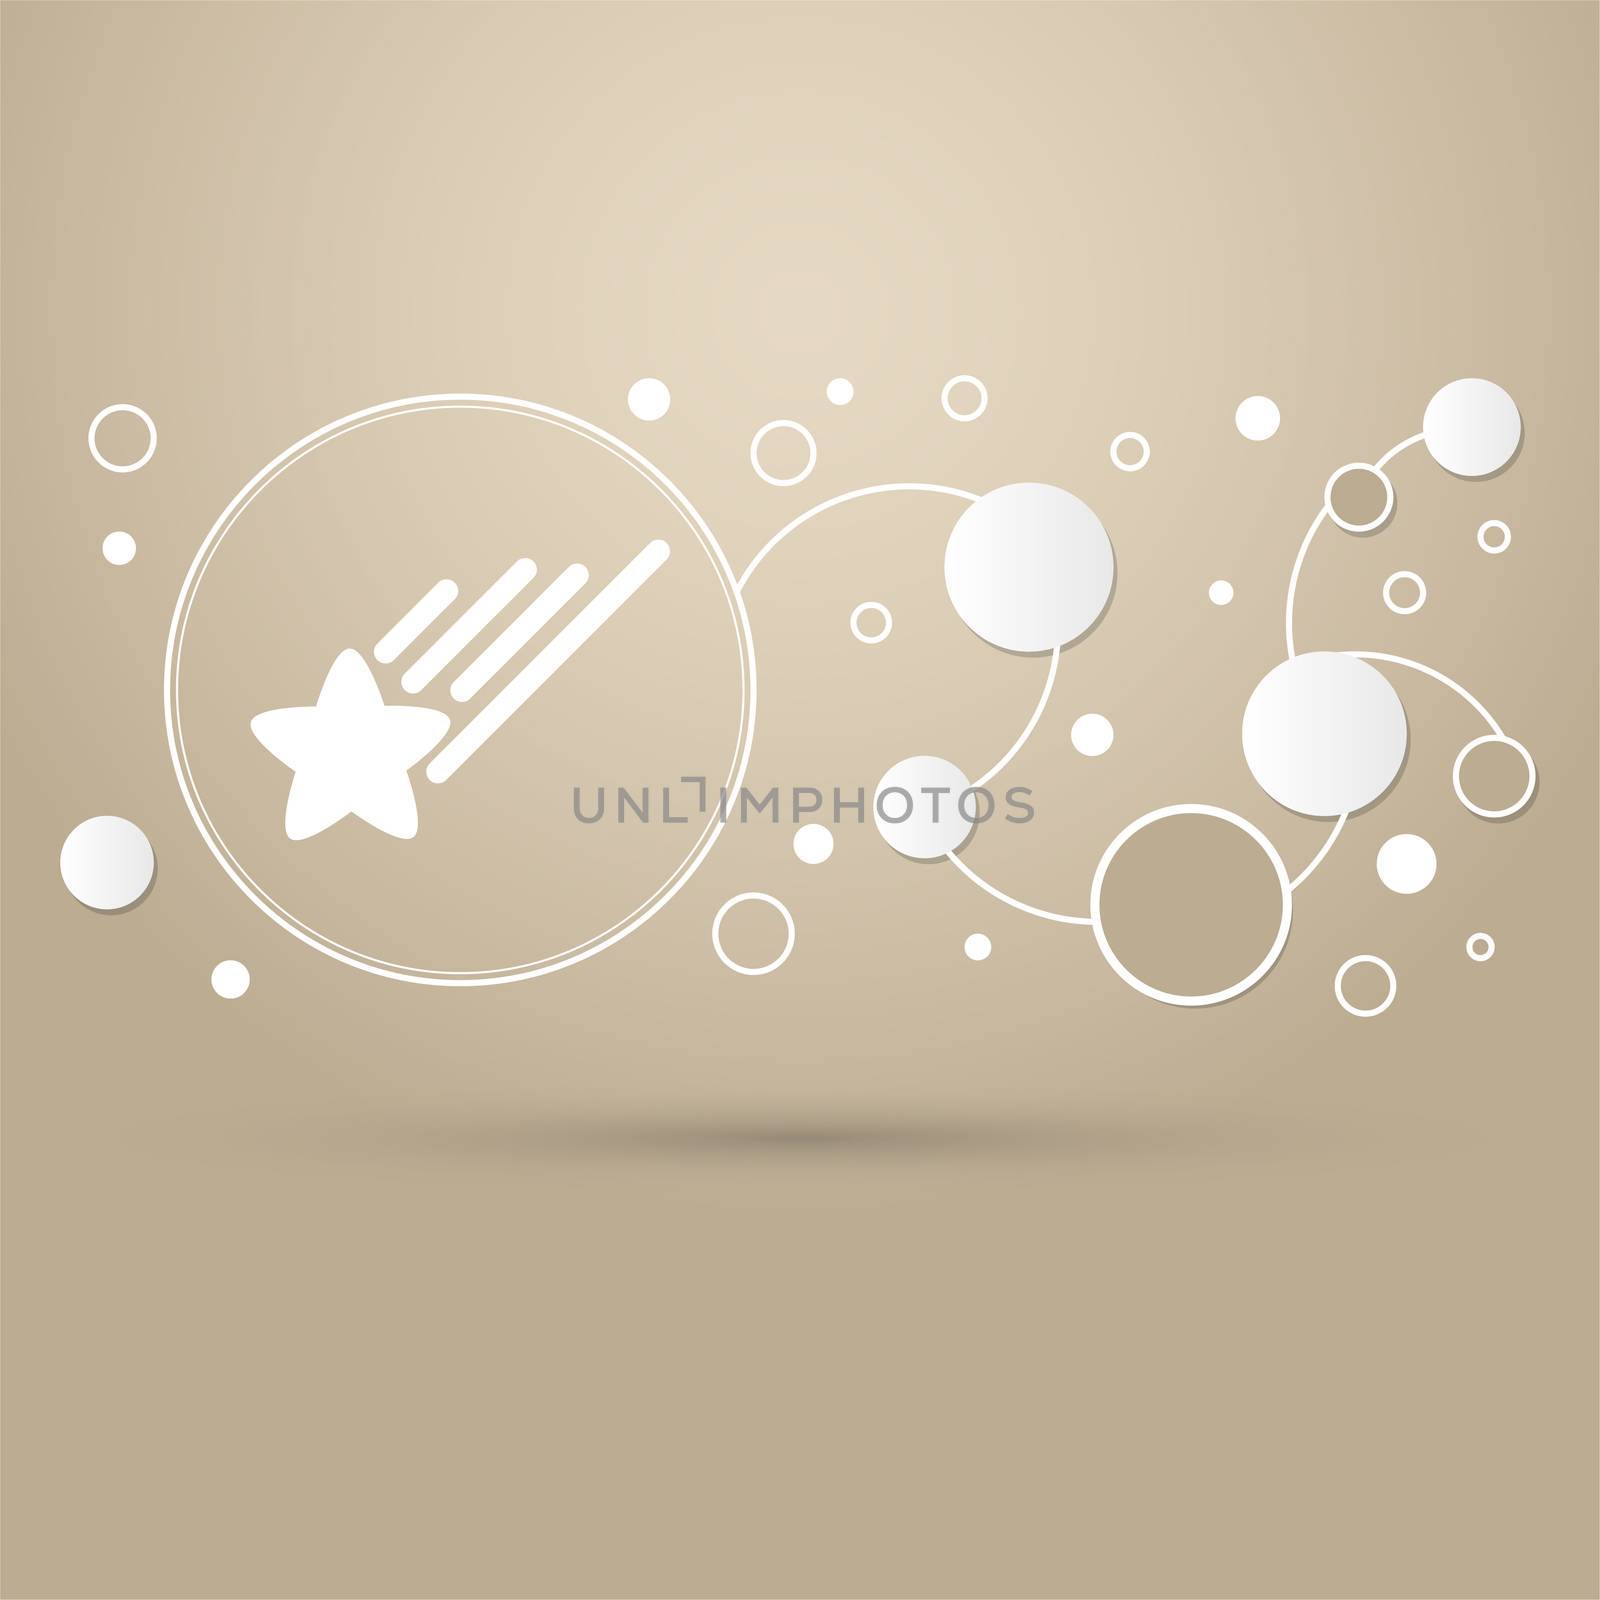 Star Icon on a brown background with elegant style and modern design infographic.  by Adamchuk